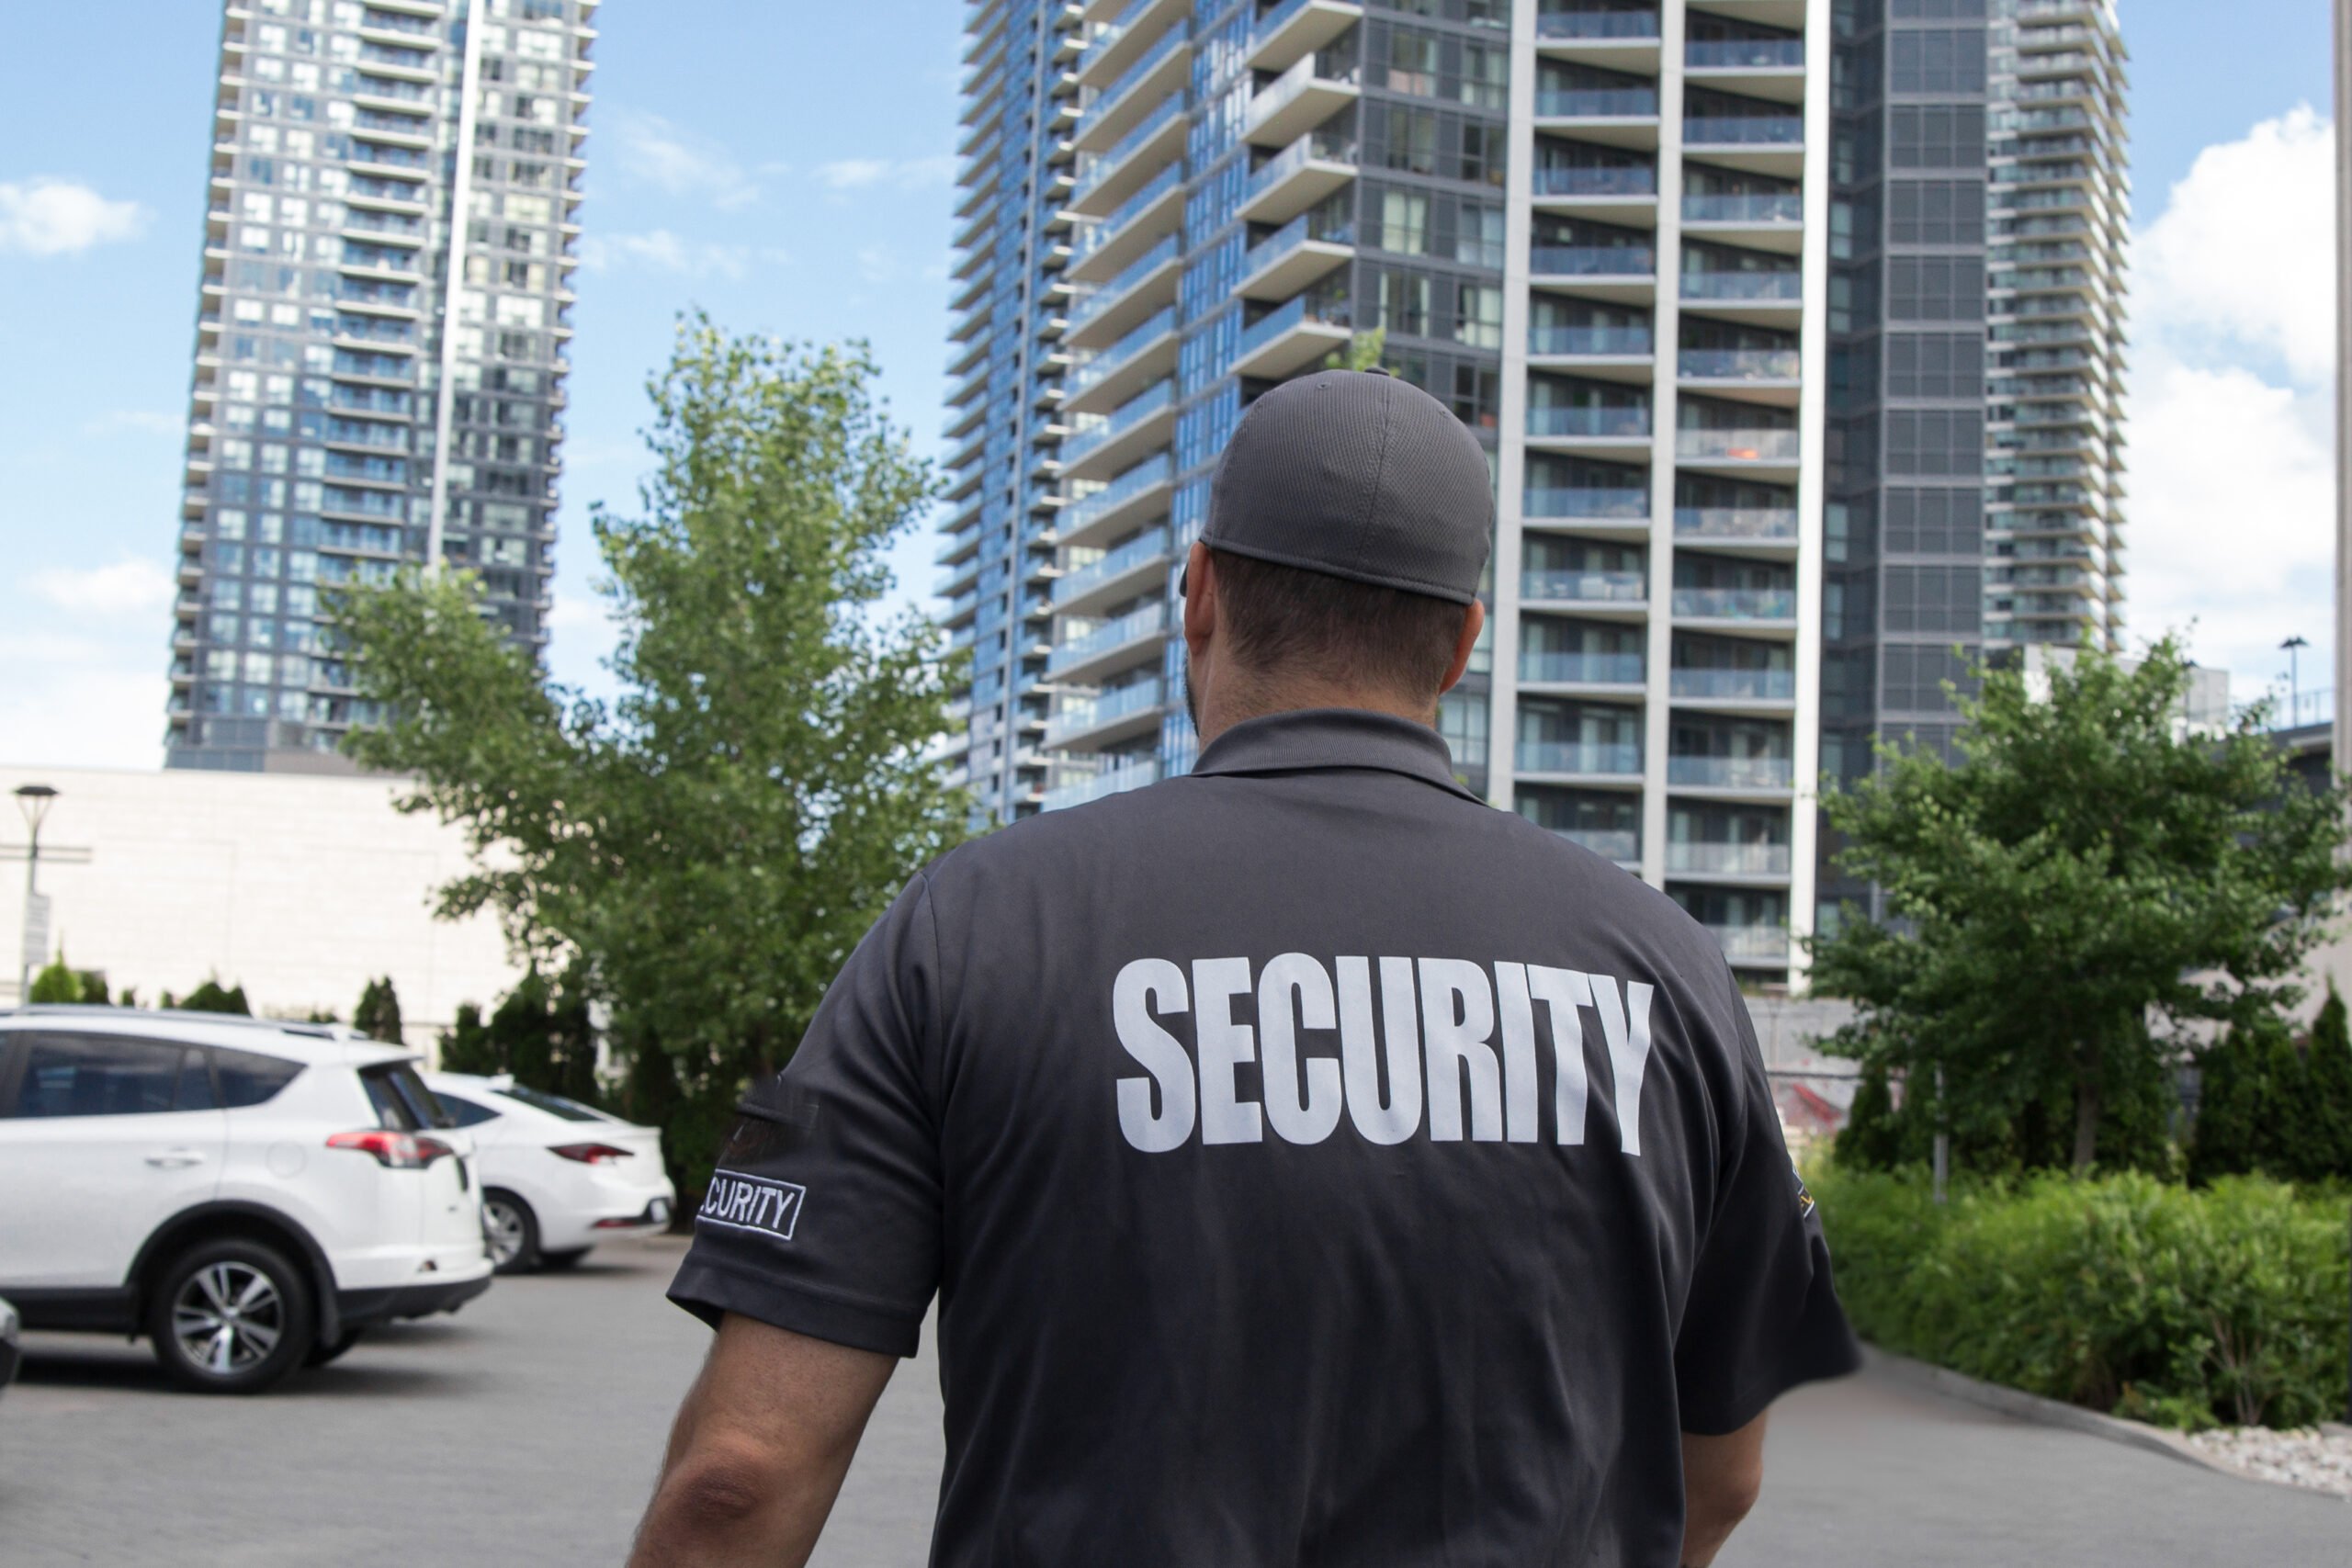 Apartment Complex Security: Why Security Guard Services Are Essential for Resident Safety and Well-being